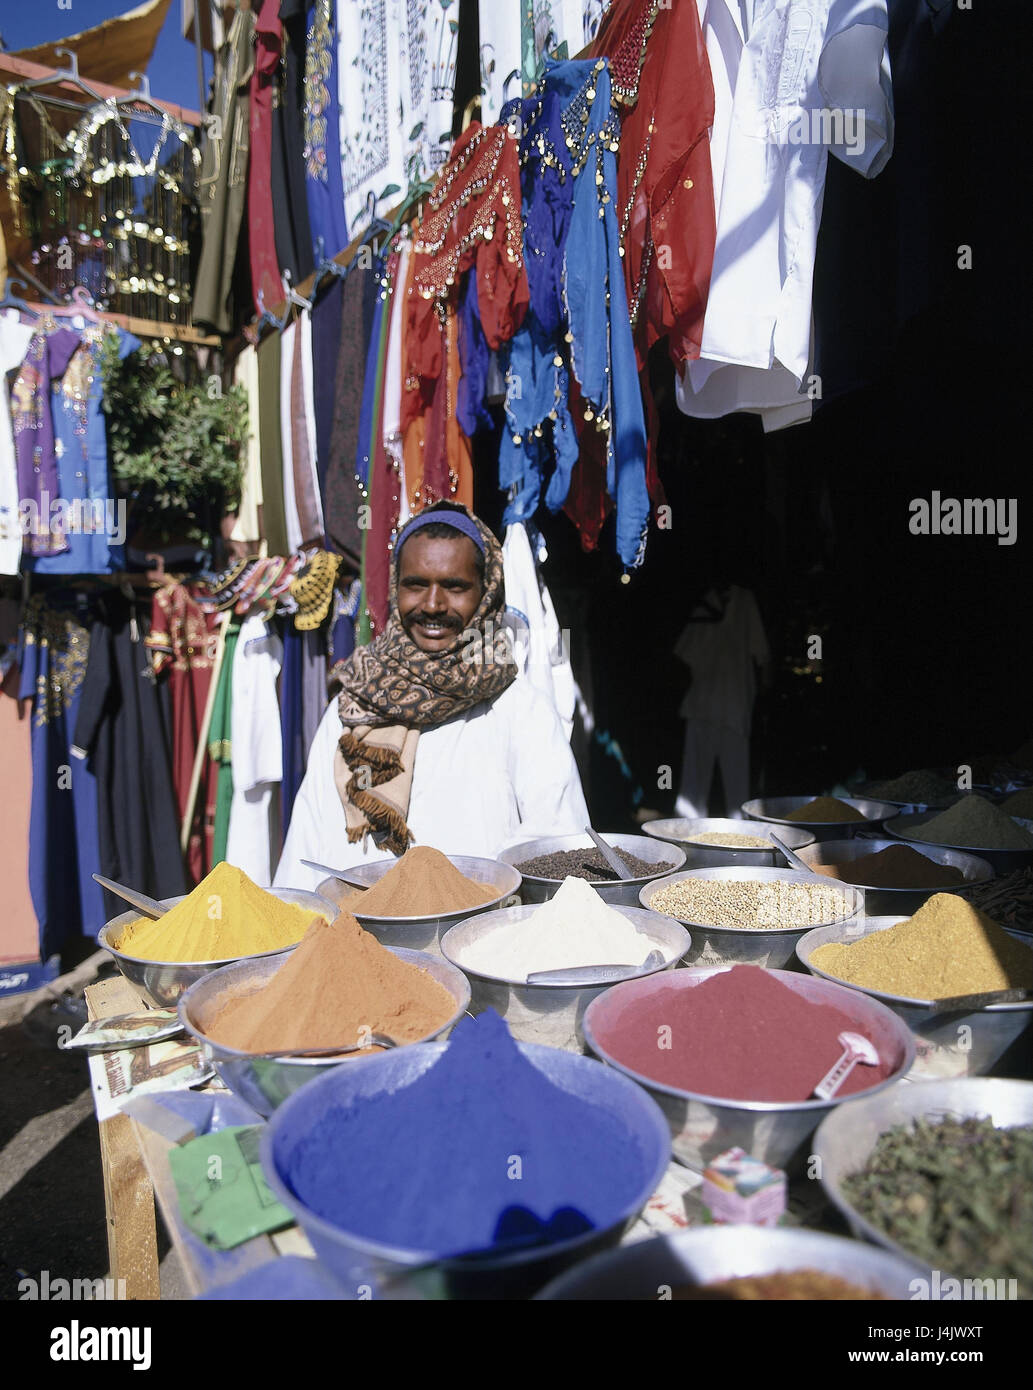 Egypt, Edfu, weekly market, spices, textiles, dealers Africa, North Africa, market, market scene, sales, trade, economy, food, colours, dye, brightly, clothes, substances, man, Egyptian, young Stock Photo